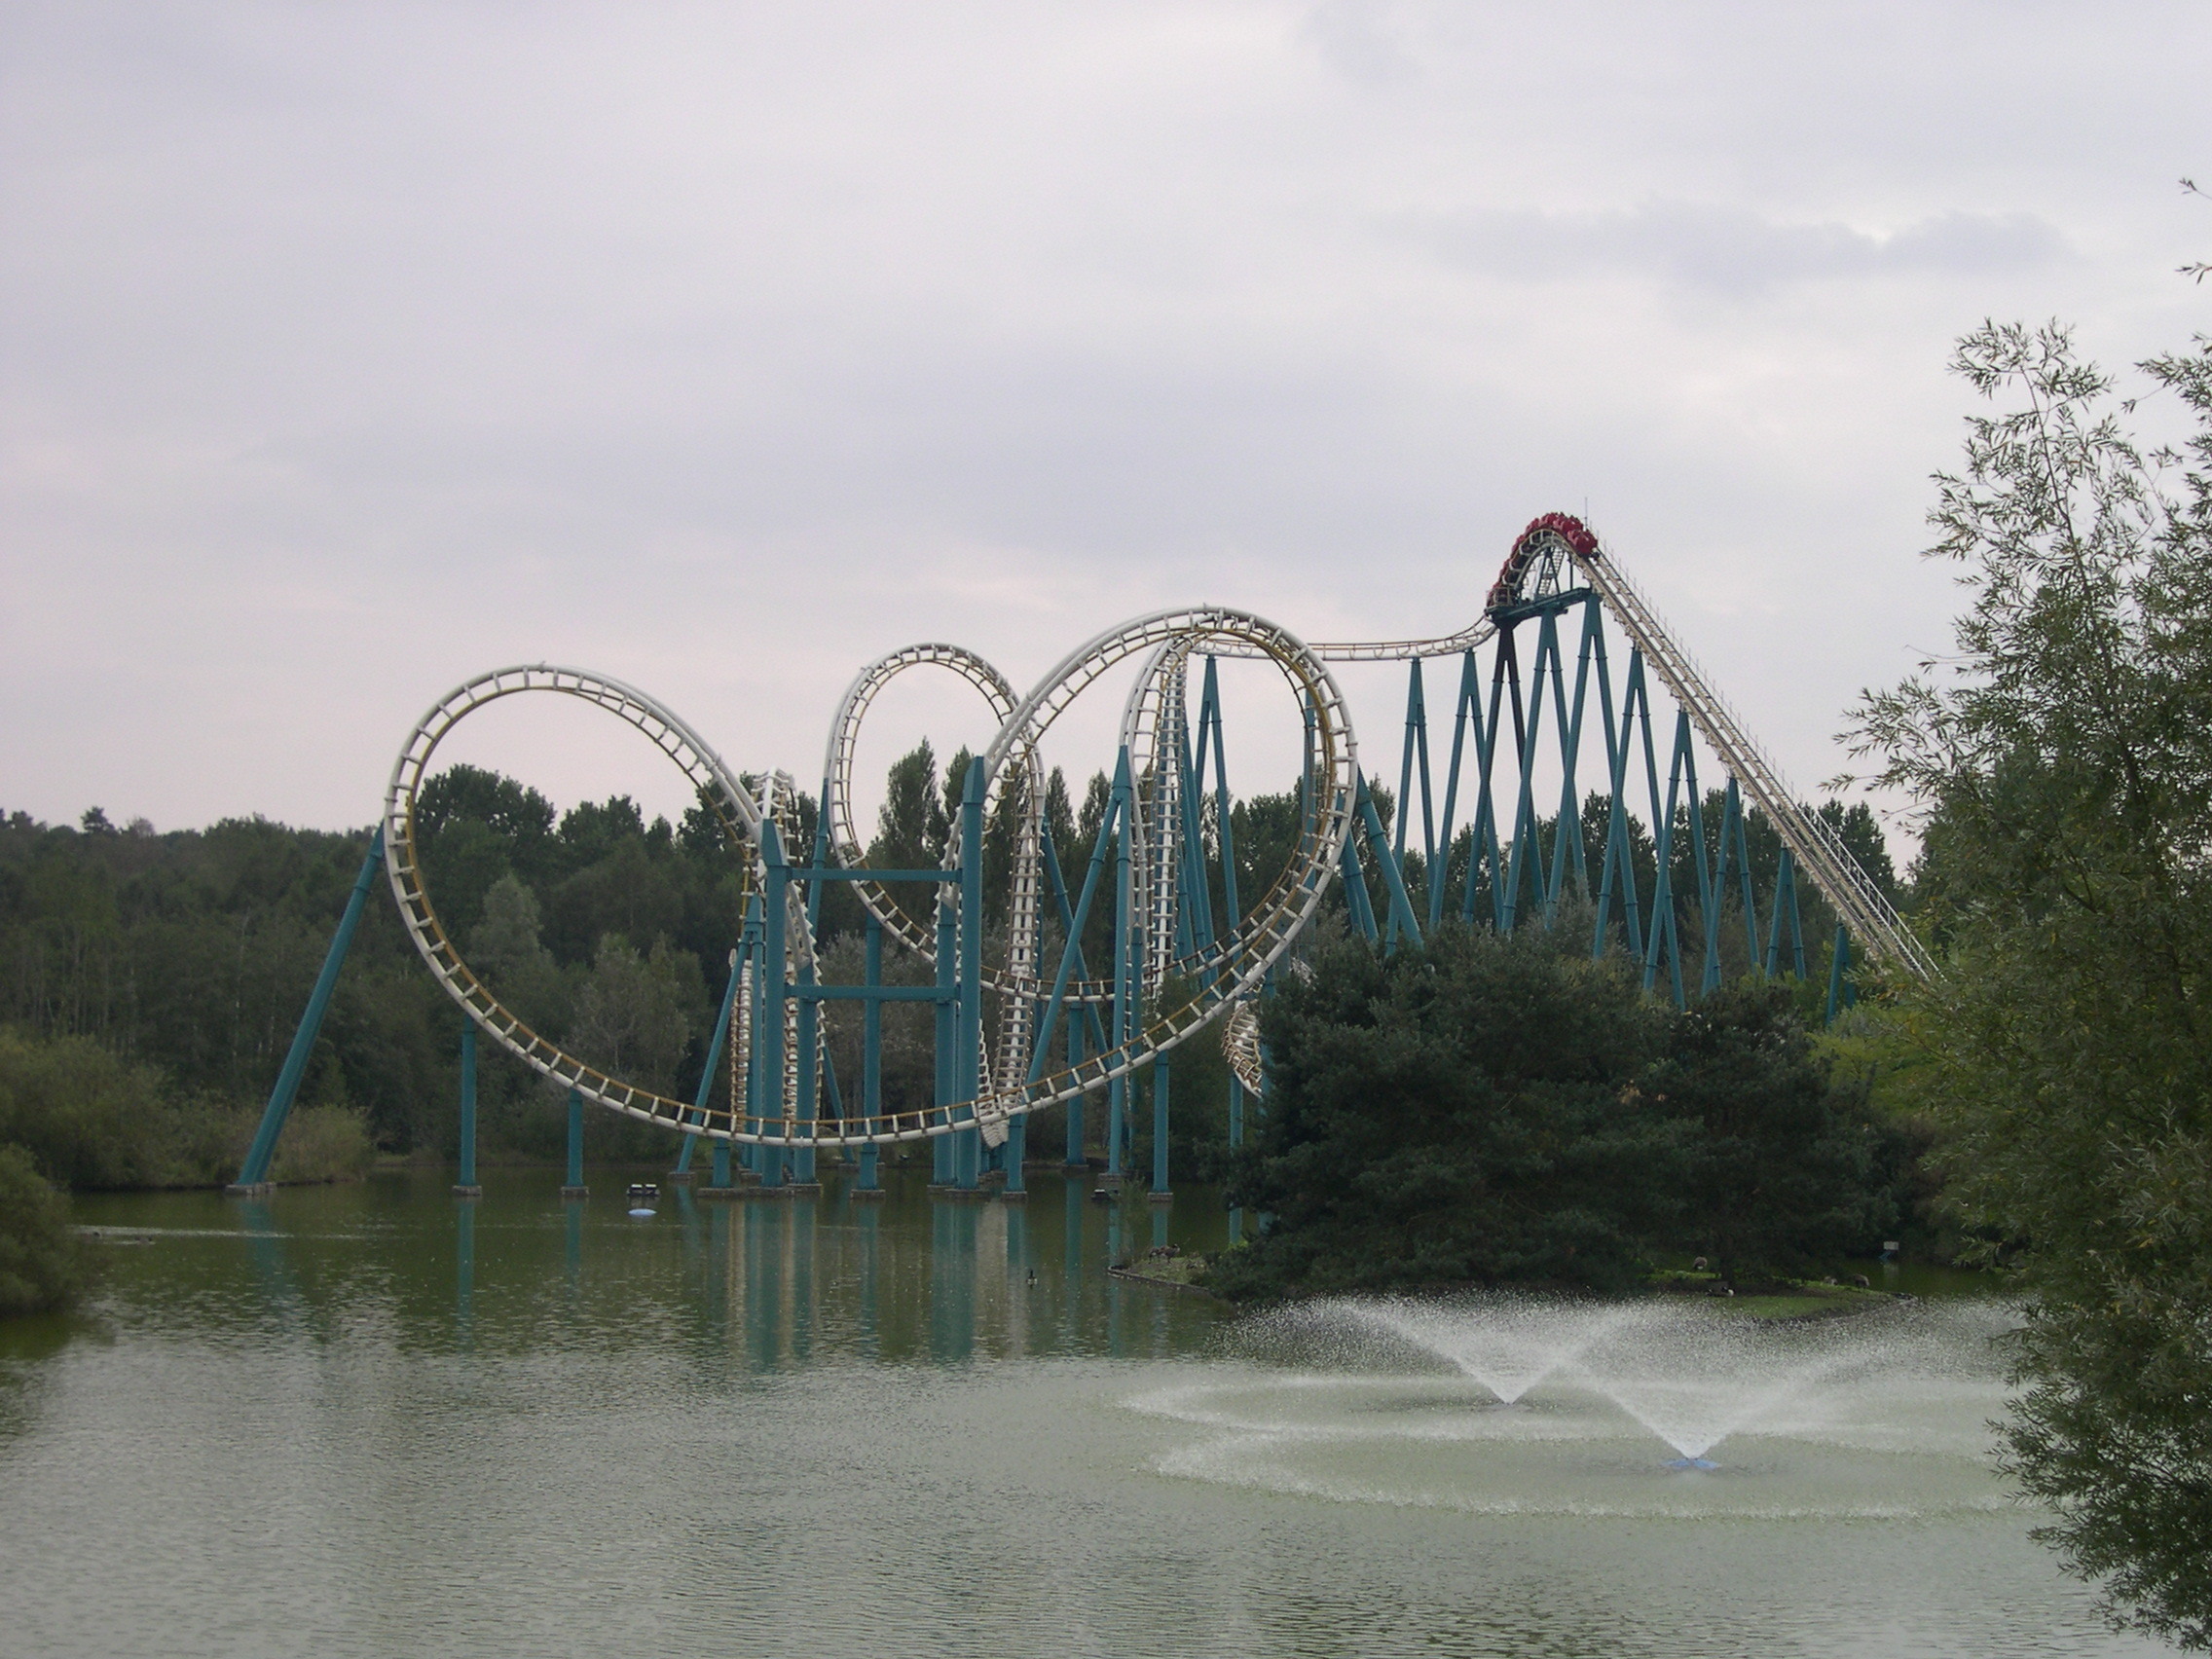 Parc Asterix is one of the most fun day trips from Paris